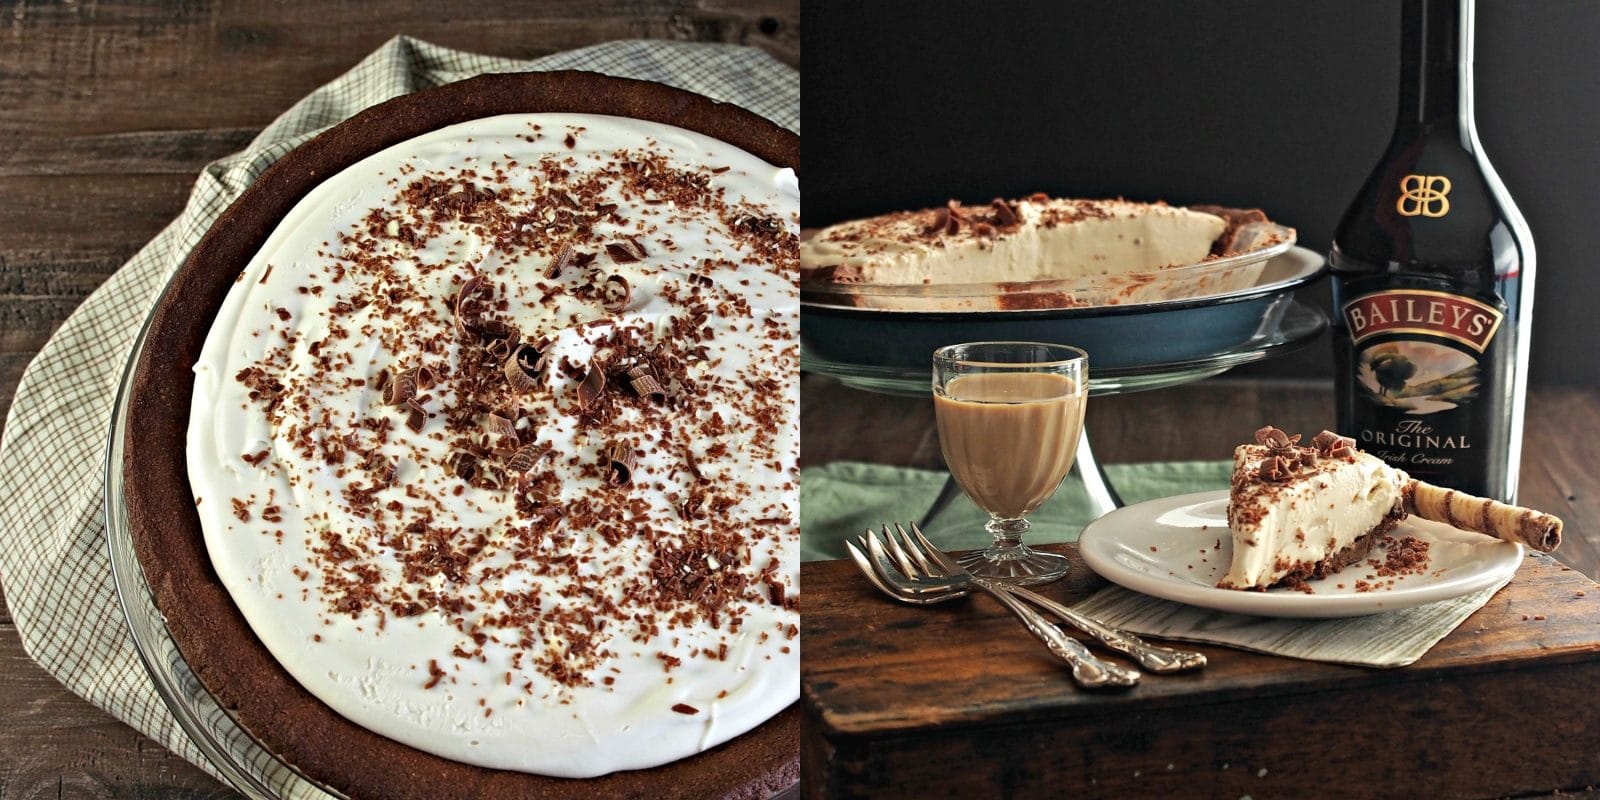 Irish Cream Pie. Even if your eyes aren't Irish, they will be smiling after one bite of this deliciously creamy pie with chocolate crust & chocolate curls. Simply Sated